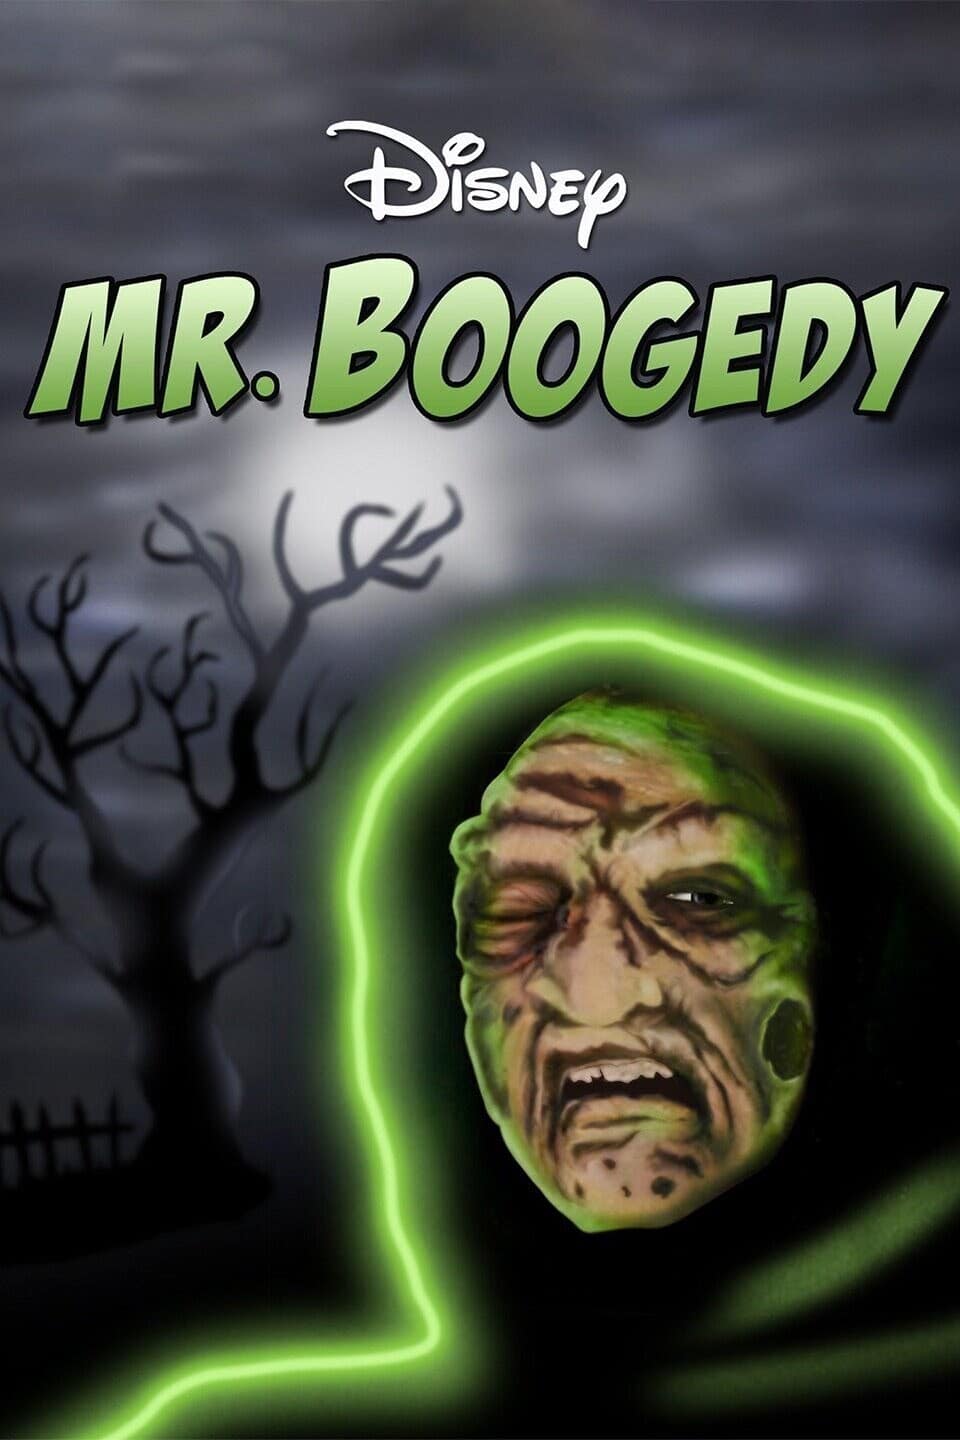 Mr. Boogedy (1986)